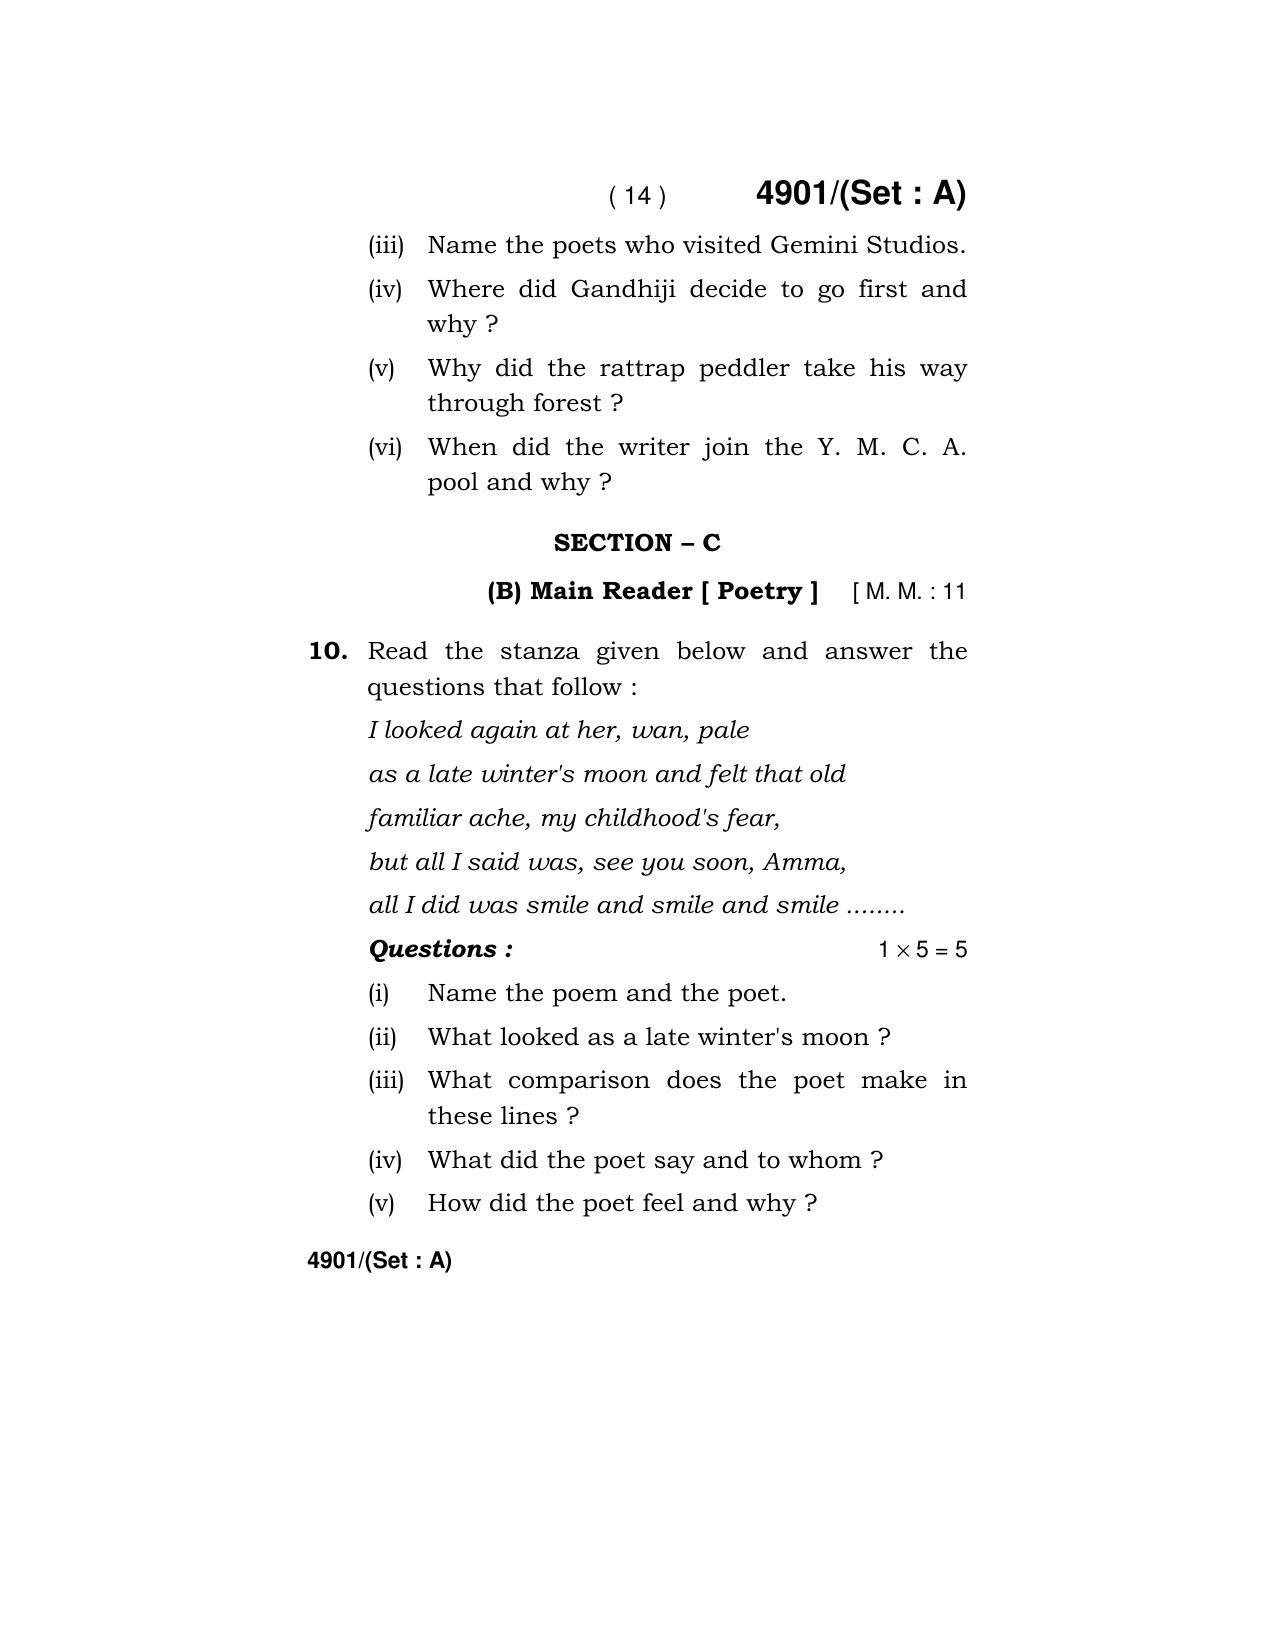 Haryana Board HBSE Class 12 English Core 2020 Question Paper - Page 14